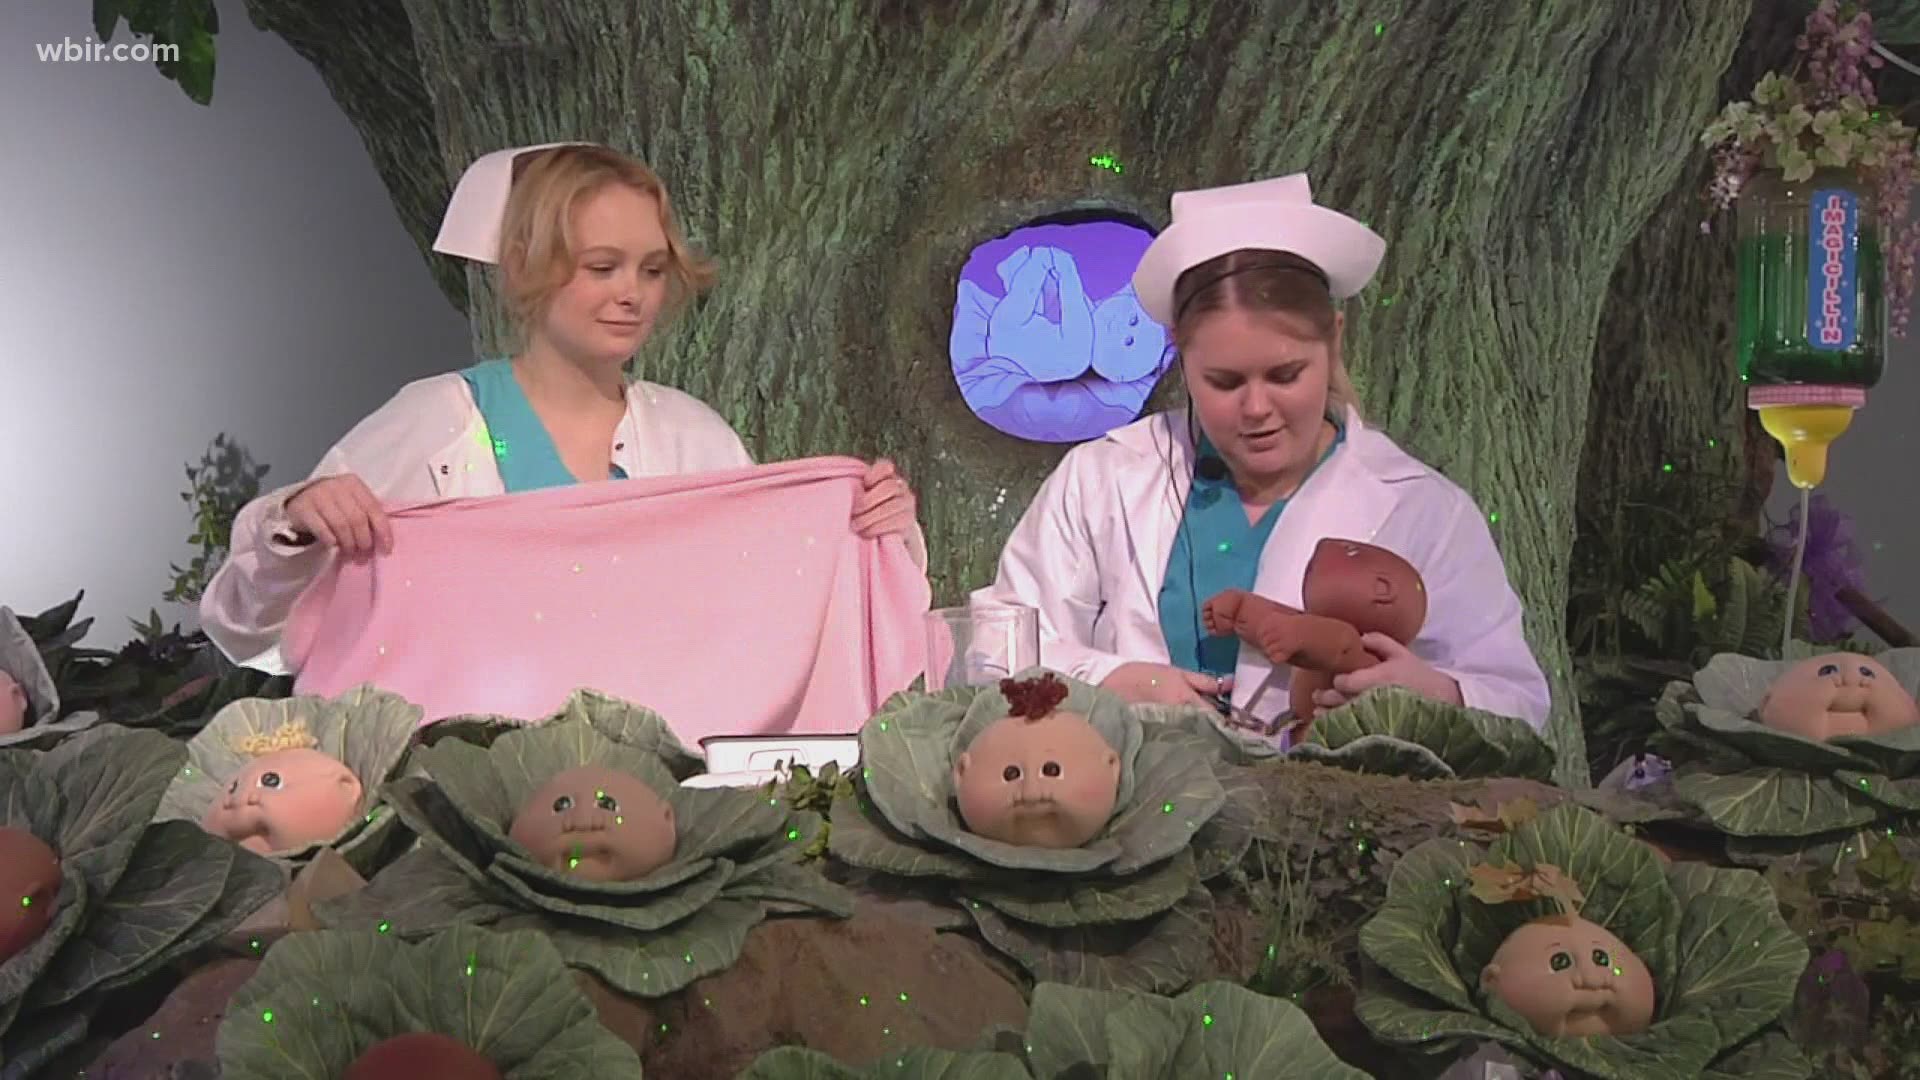 Cabbage patch hospital in georgia